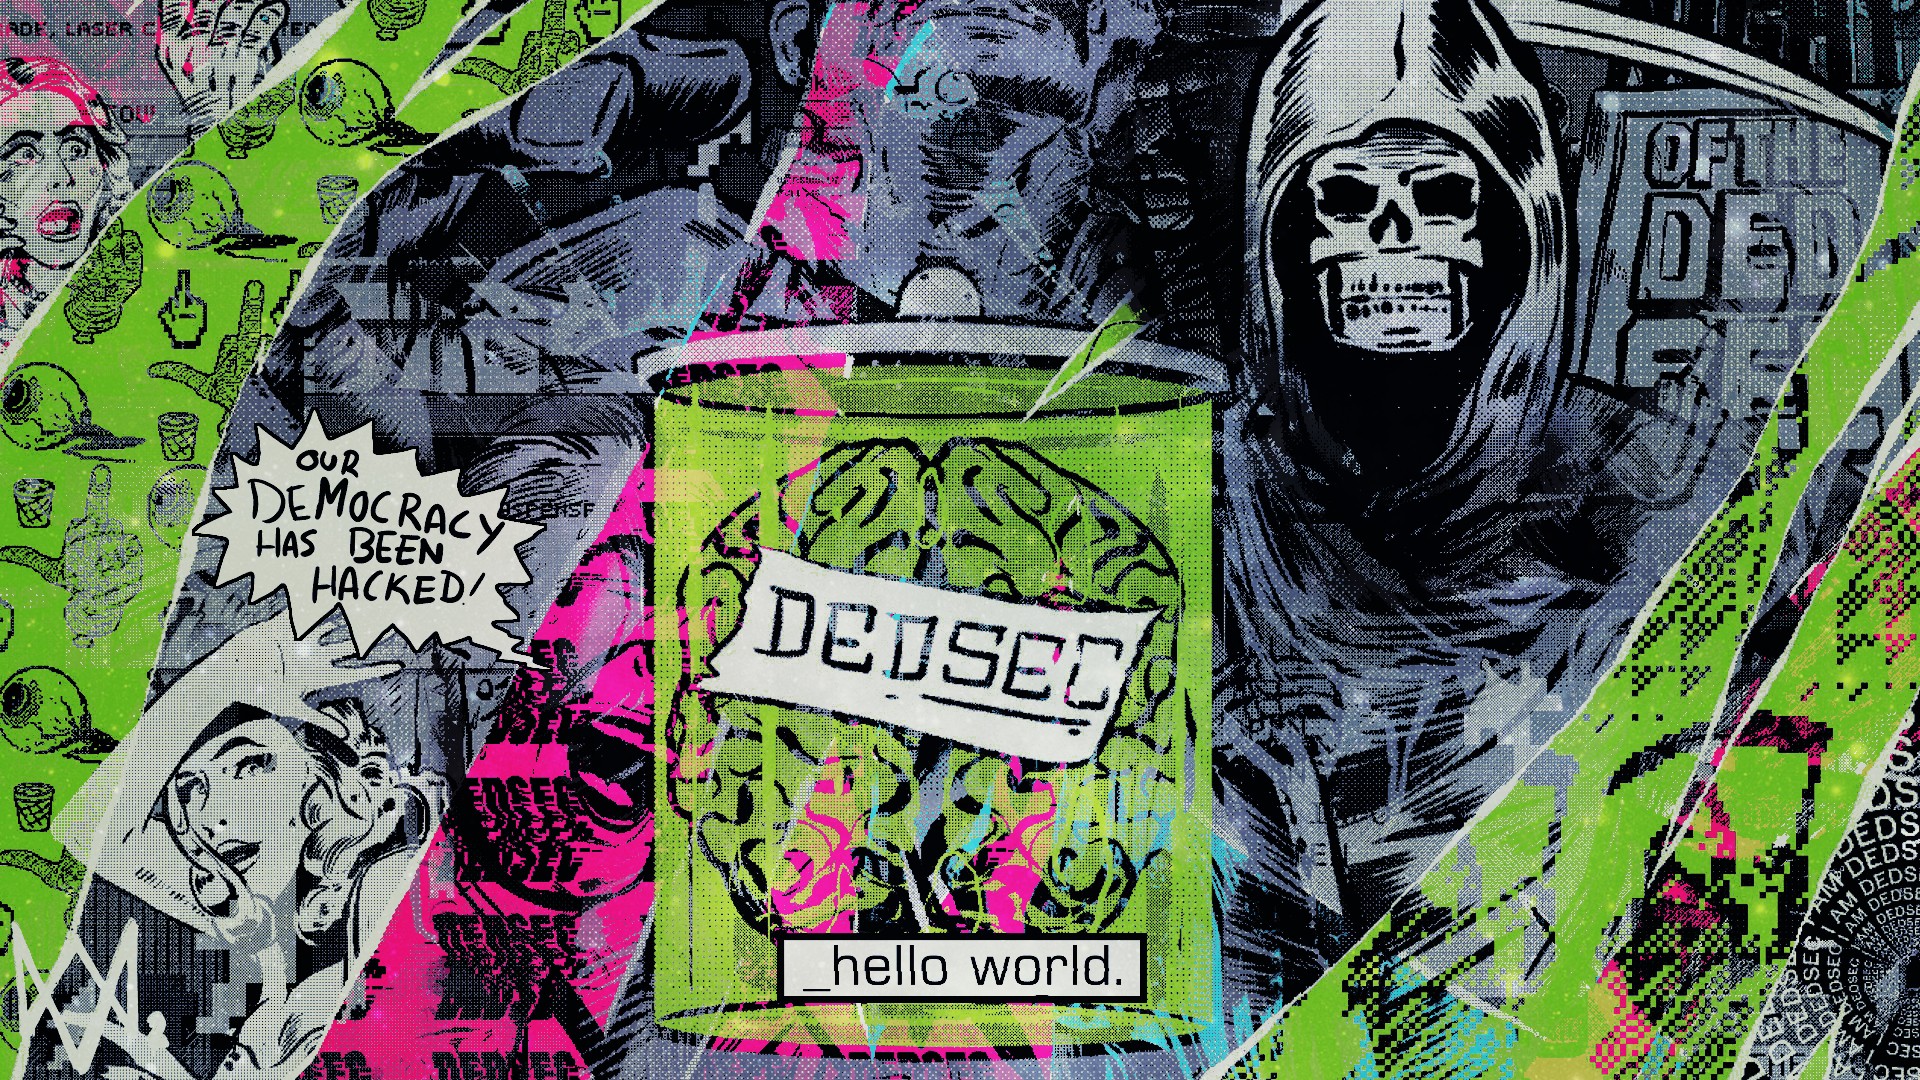 DEDSEC Watch Dogs Hacking Democracy Hello World Watch Dogs 2 1920x1080